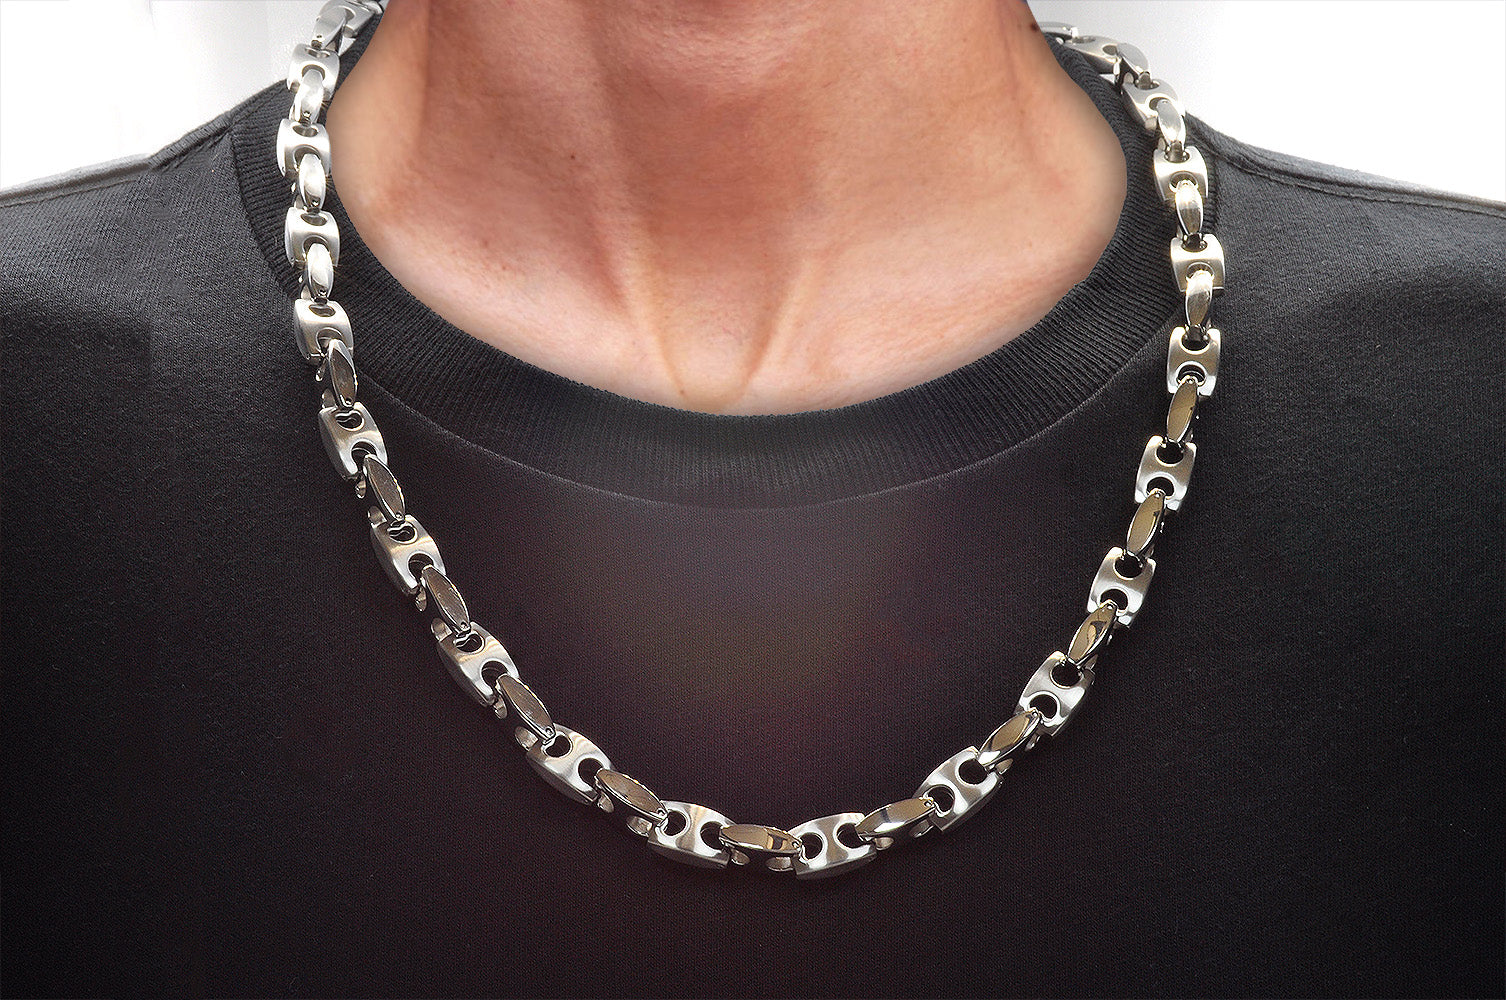 Sanity Jewelry - Biker Jewelry, Skull Jewelry, Mens Necklace, Mens chains,  Biker Chains - Chain Gang Badass Skull Necklace